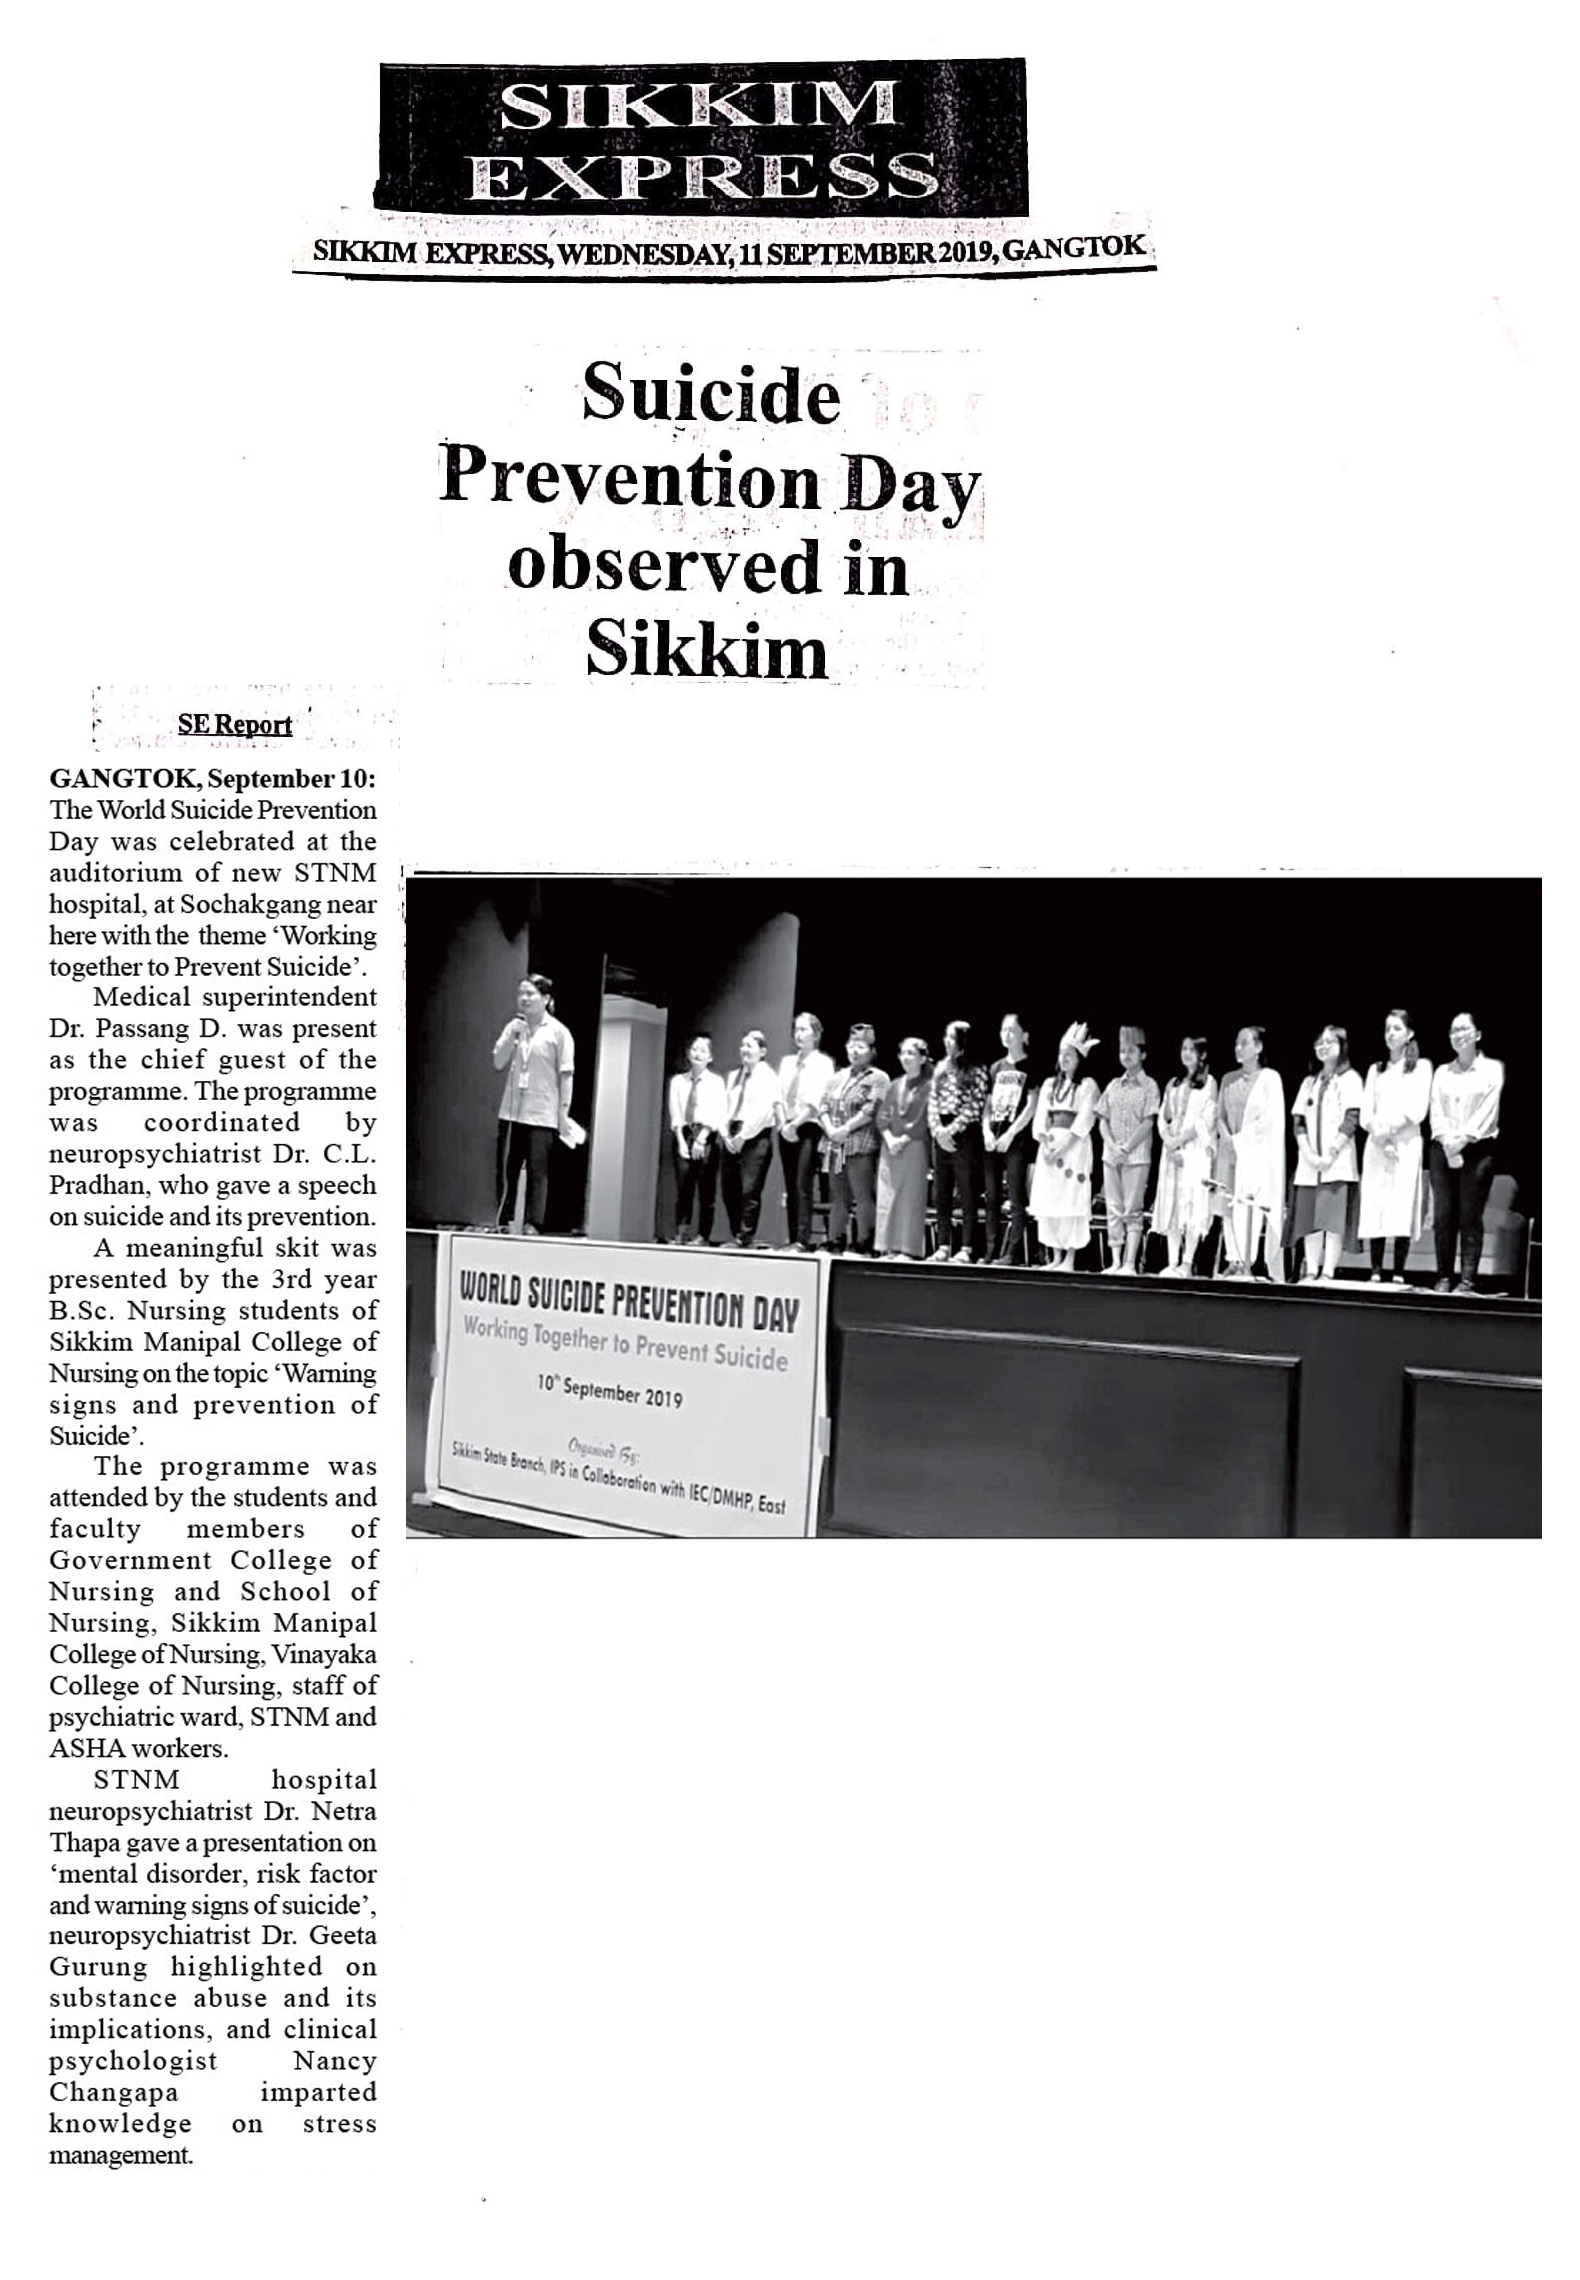 SMCON - SUICIDE PREVENTION DAY OBSERVED IN SIKKIM